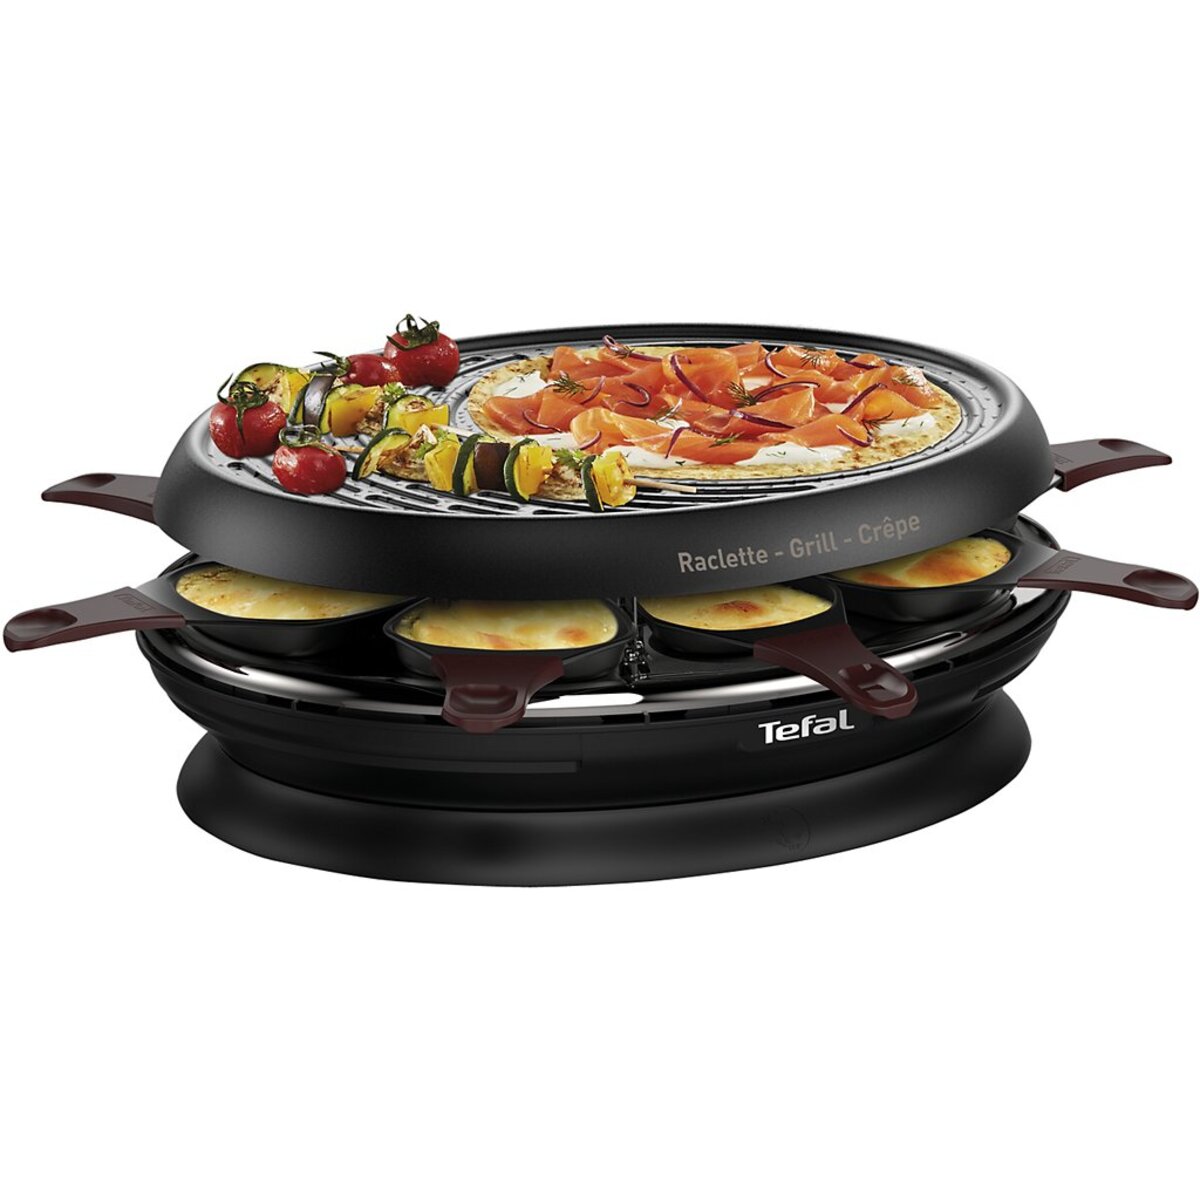 Tefal cups trays Oval Raclette fondue Accessimo Invent Colormania